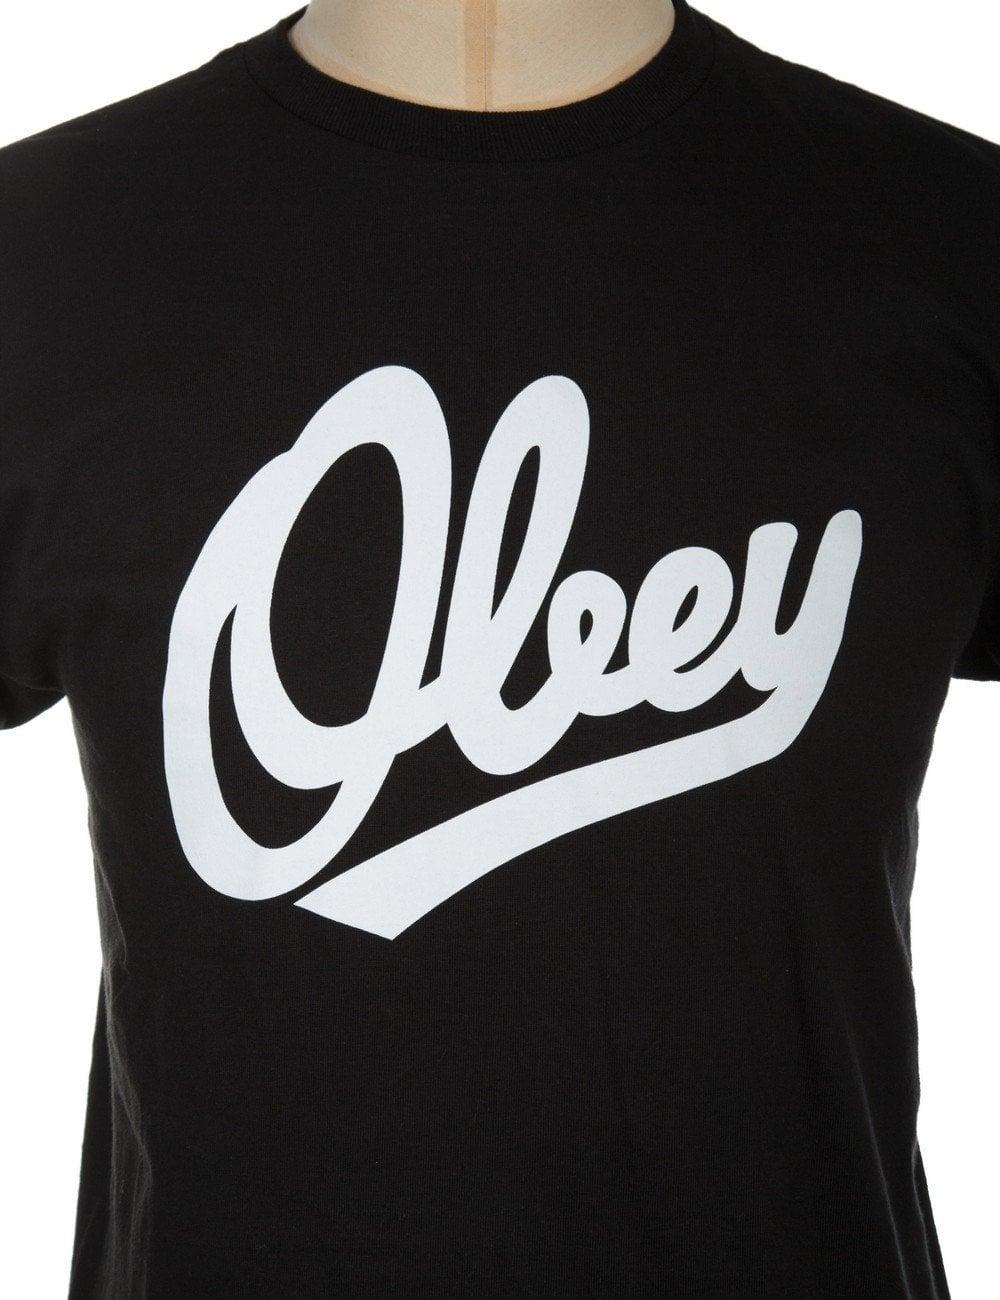 Team Obey Logo - Obey Clothing Team Obey T Shirt From Fat Buddha